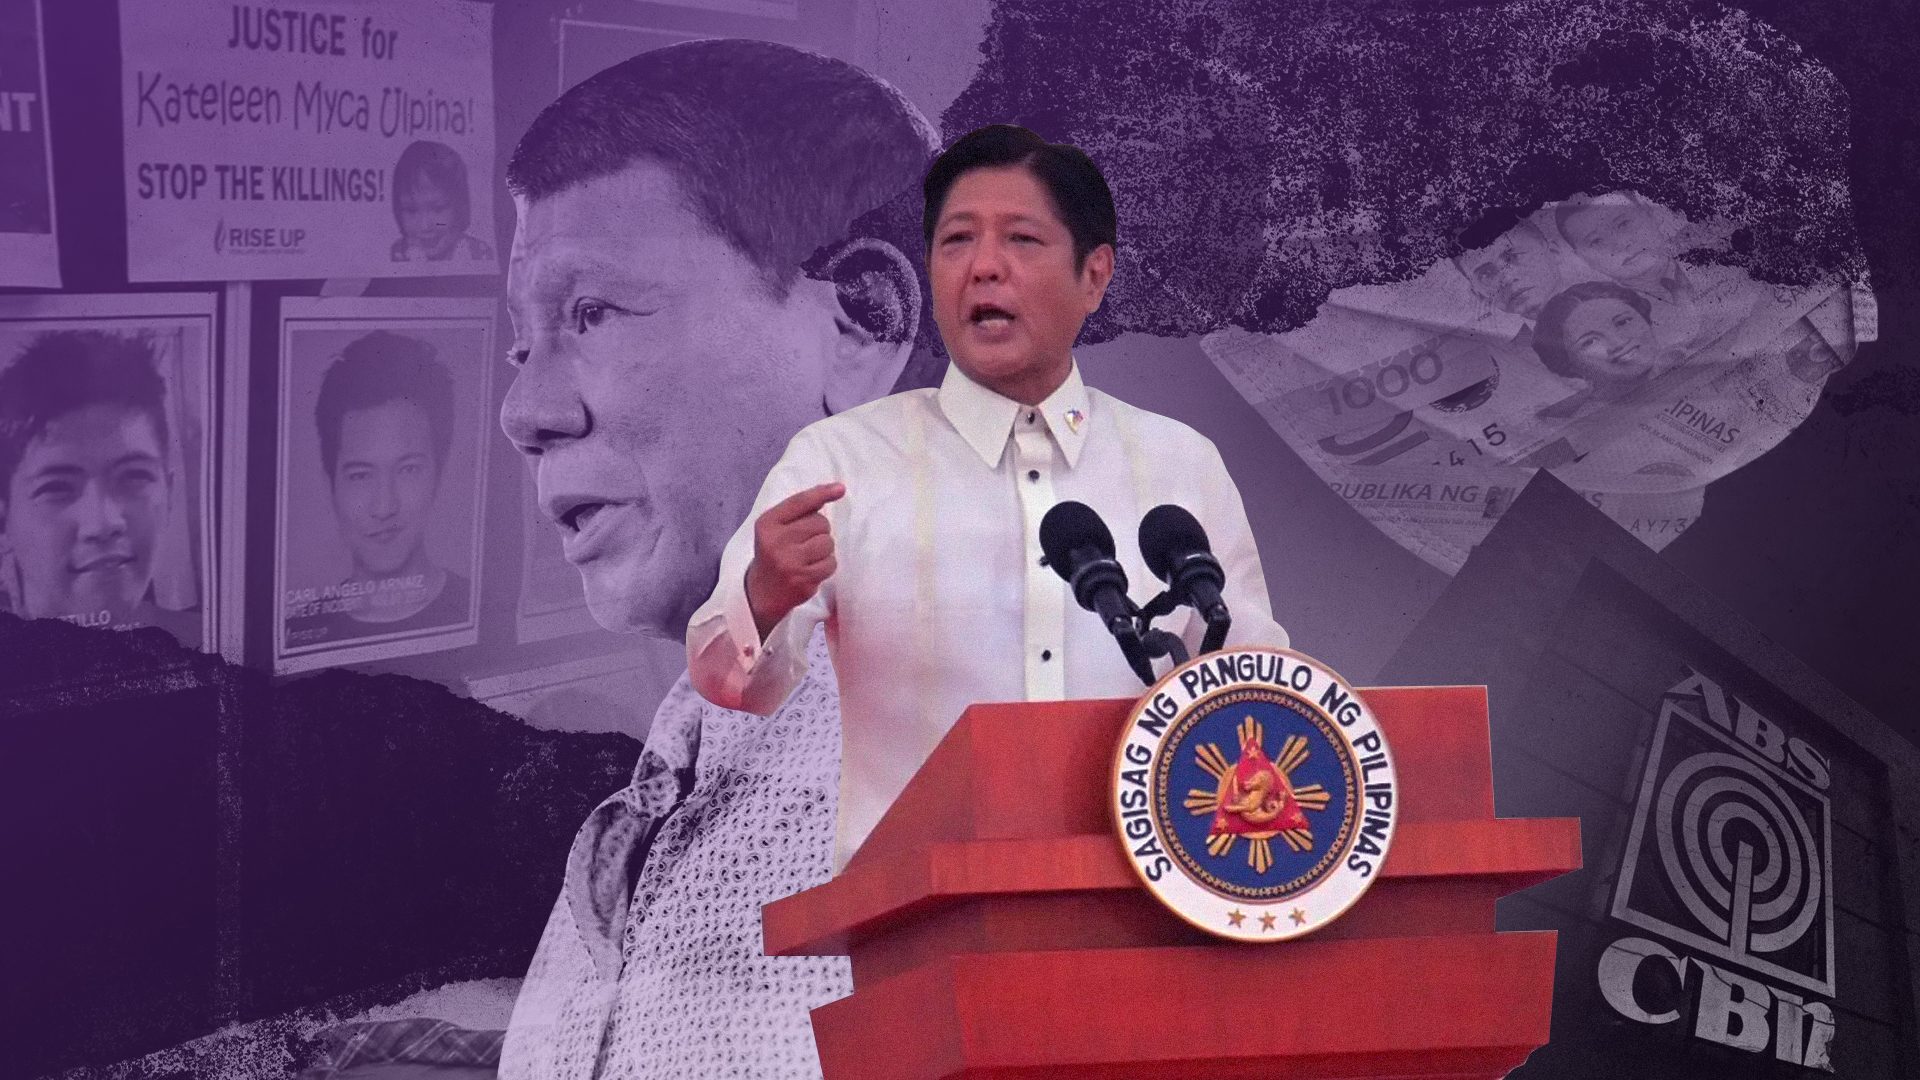 [OPINION] If Marcos wants genuine unity, he can start by smashing the Duterte playbook